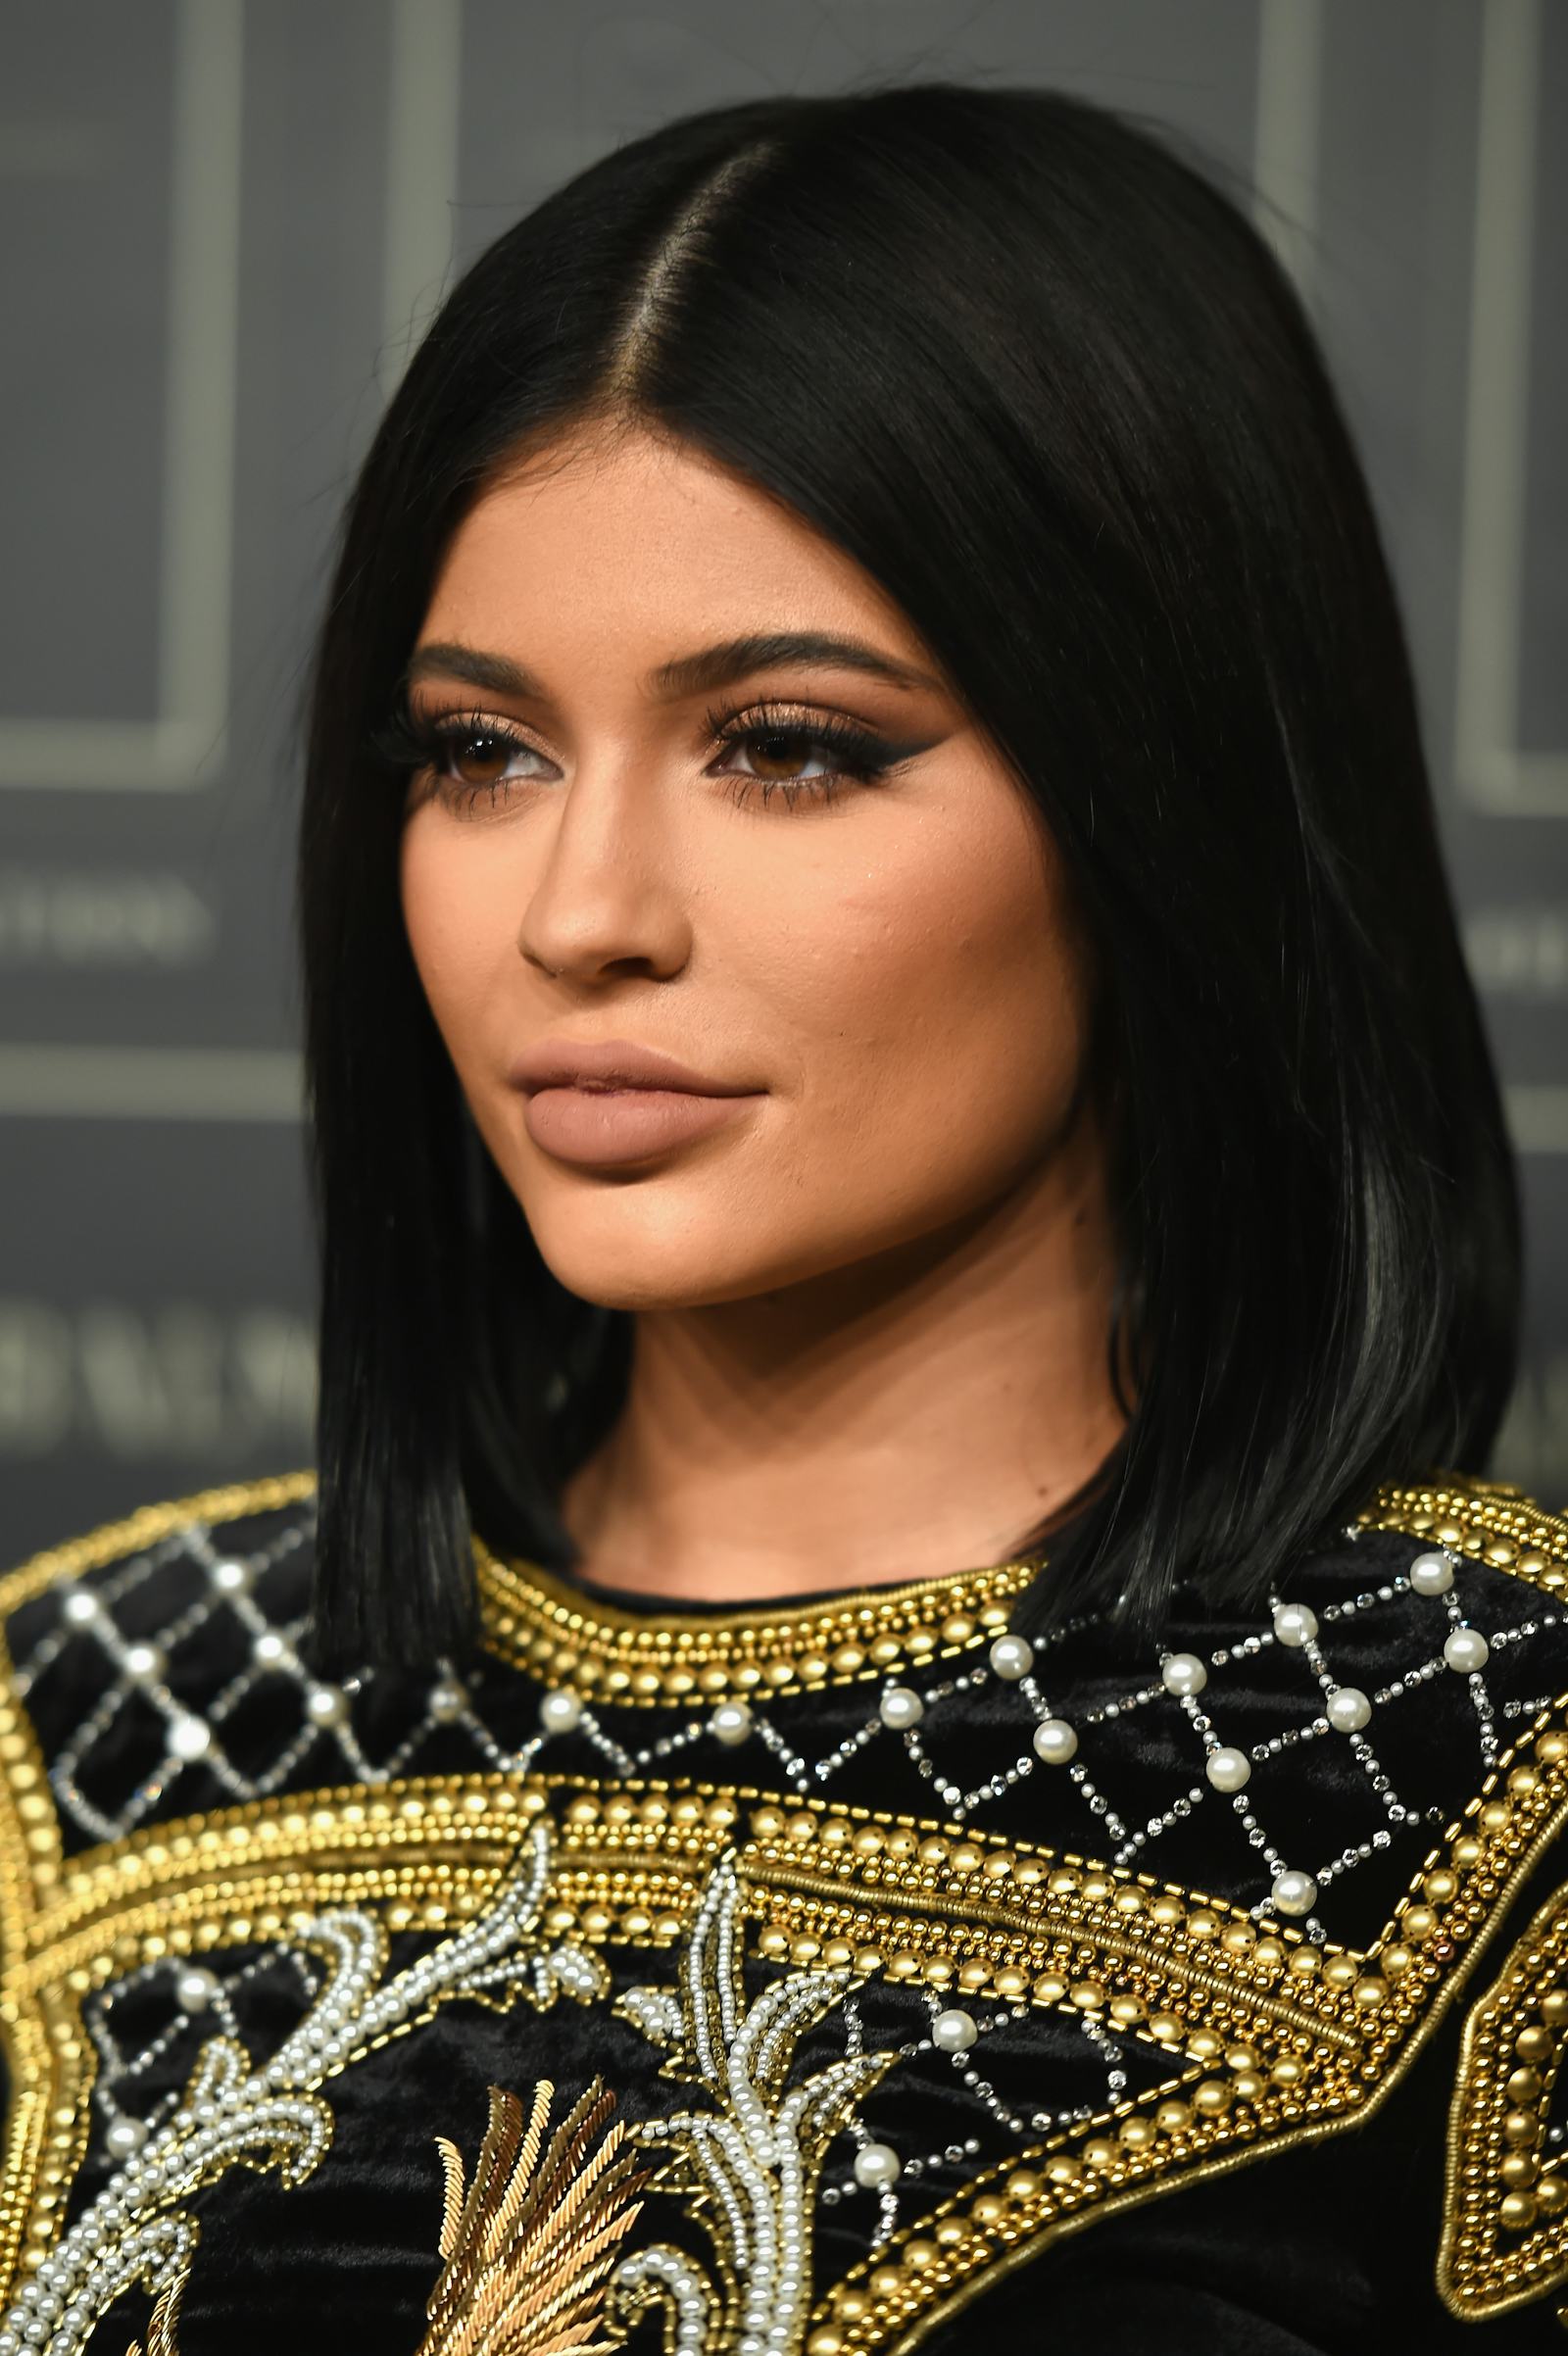 Steal Kylie Jenner's Snowboarding Look So You Can Shred In Style — PHOTOS